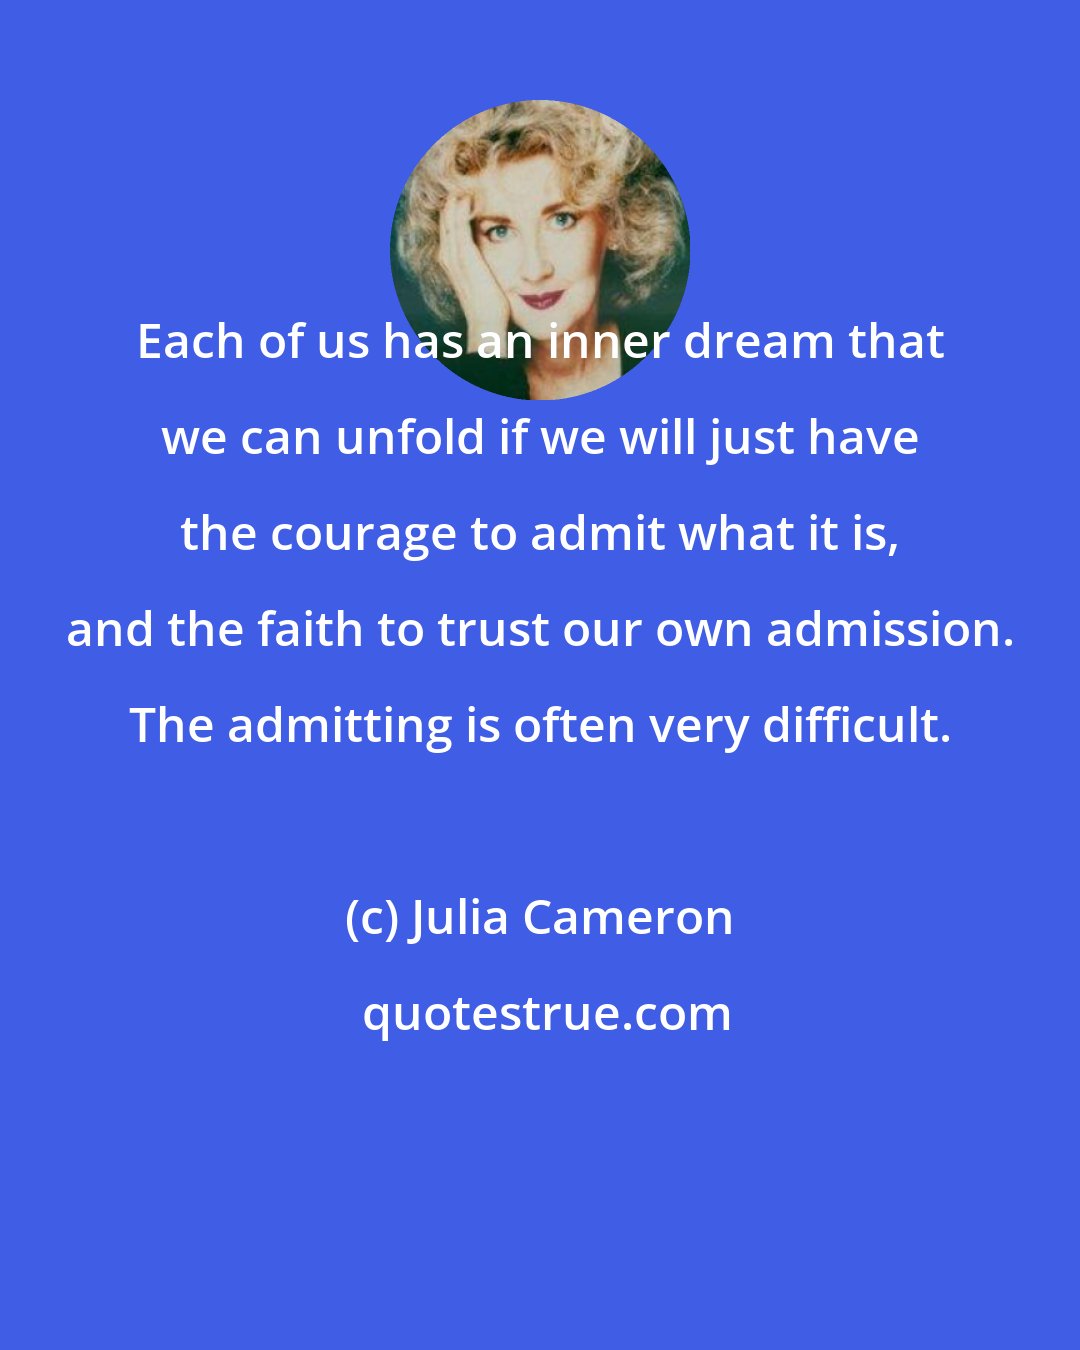 Julia Cameron: Each of us has an inner dream that we can unfold if we will just have the courage to admit what it is, and the faith to trust our own admission. The admitting is often very difficult.